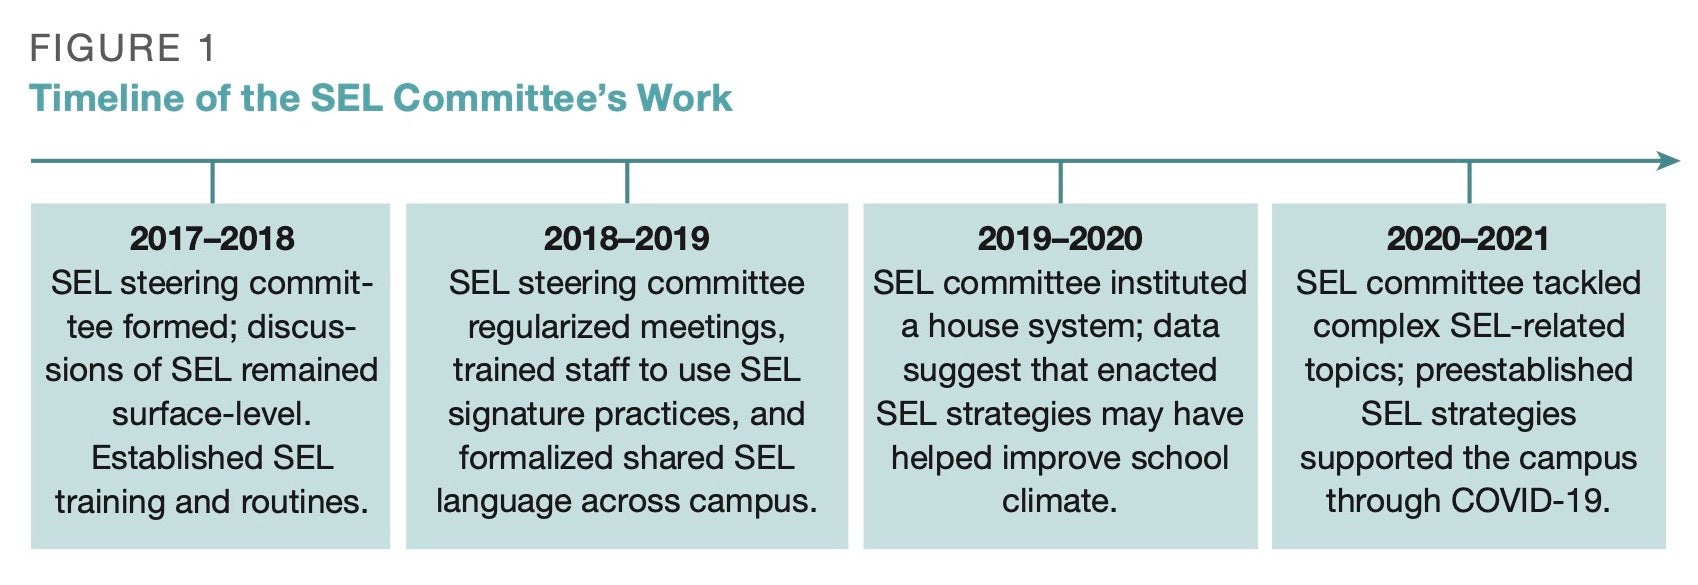 Timeline of the SEL Committee's work